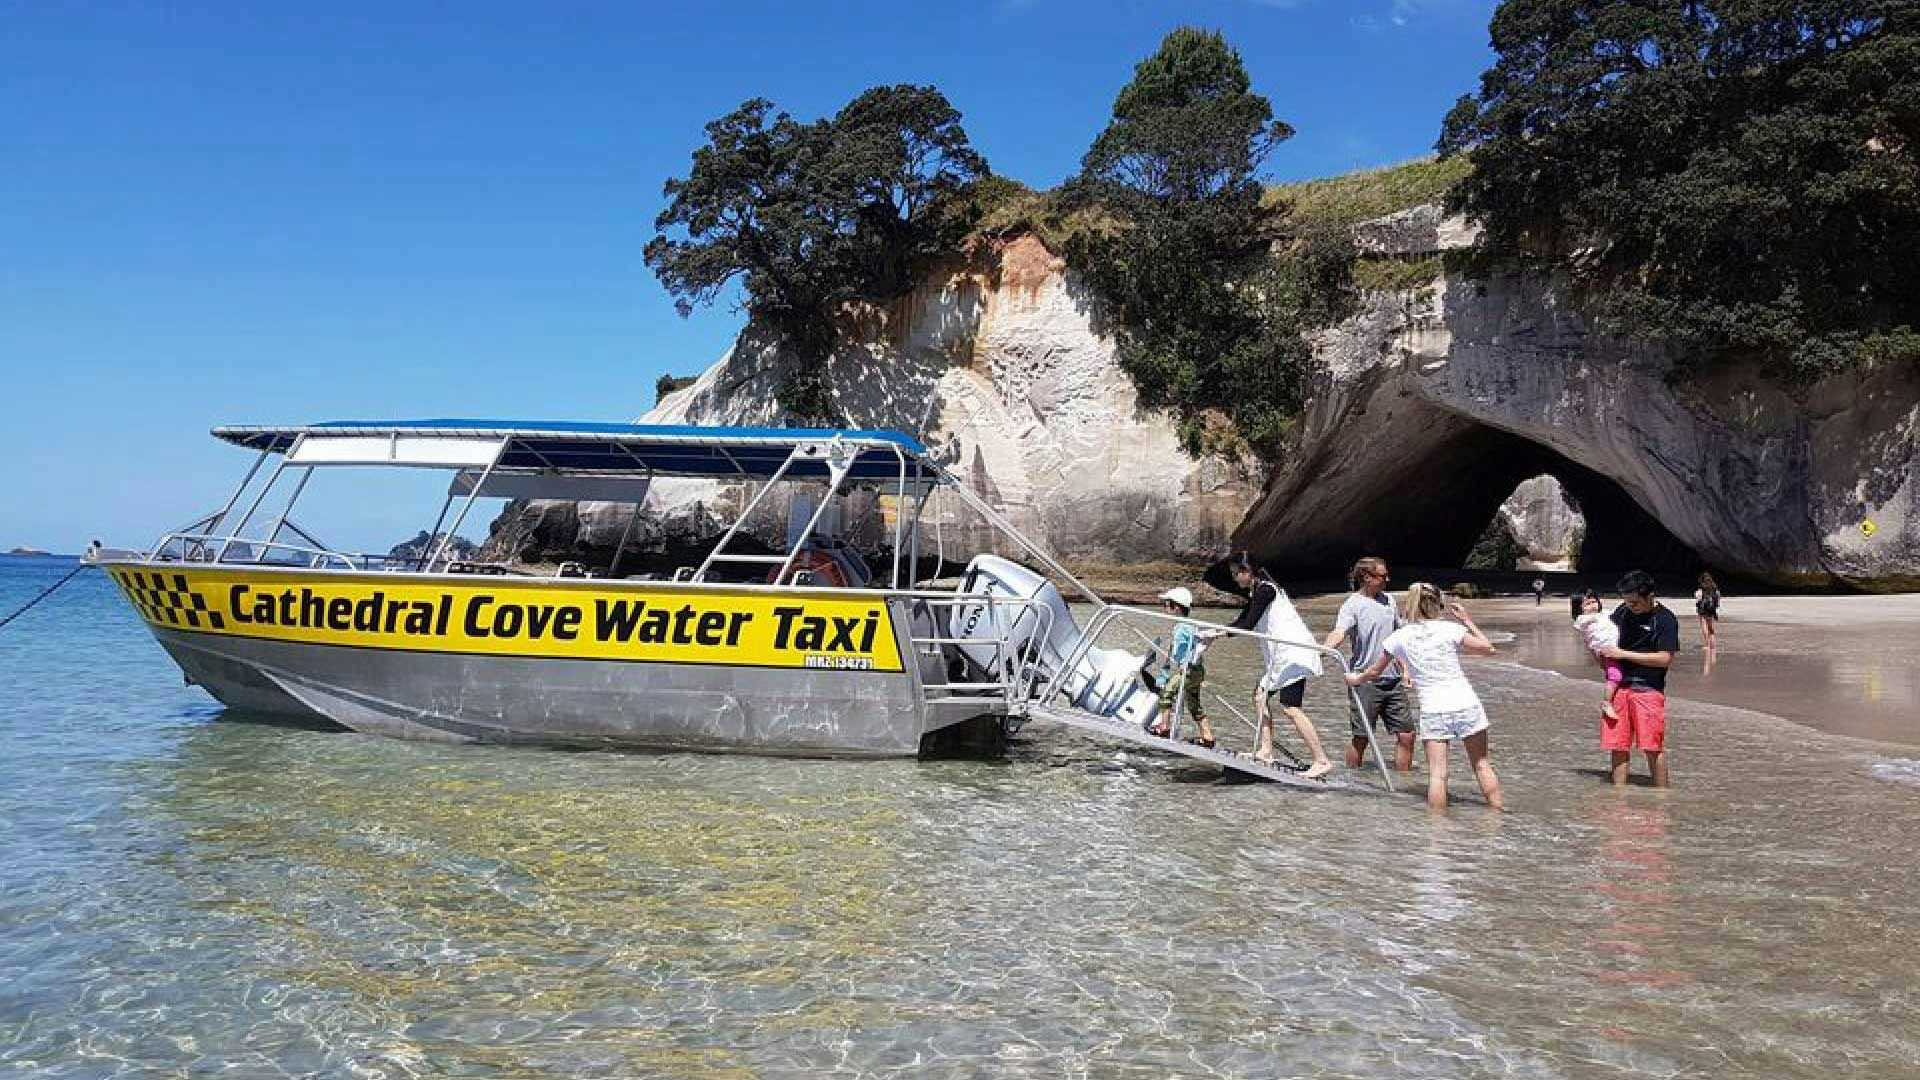 Hahei water Taxi boarding people at Cathedral Cove